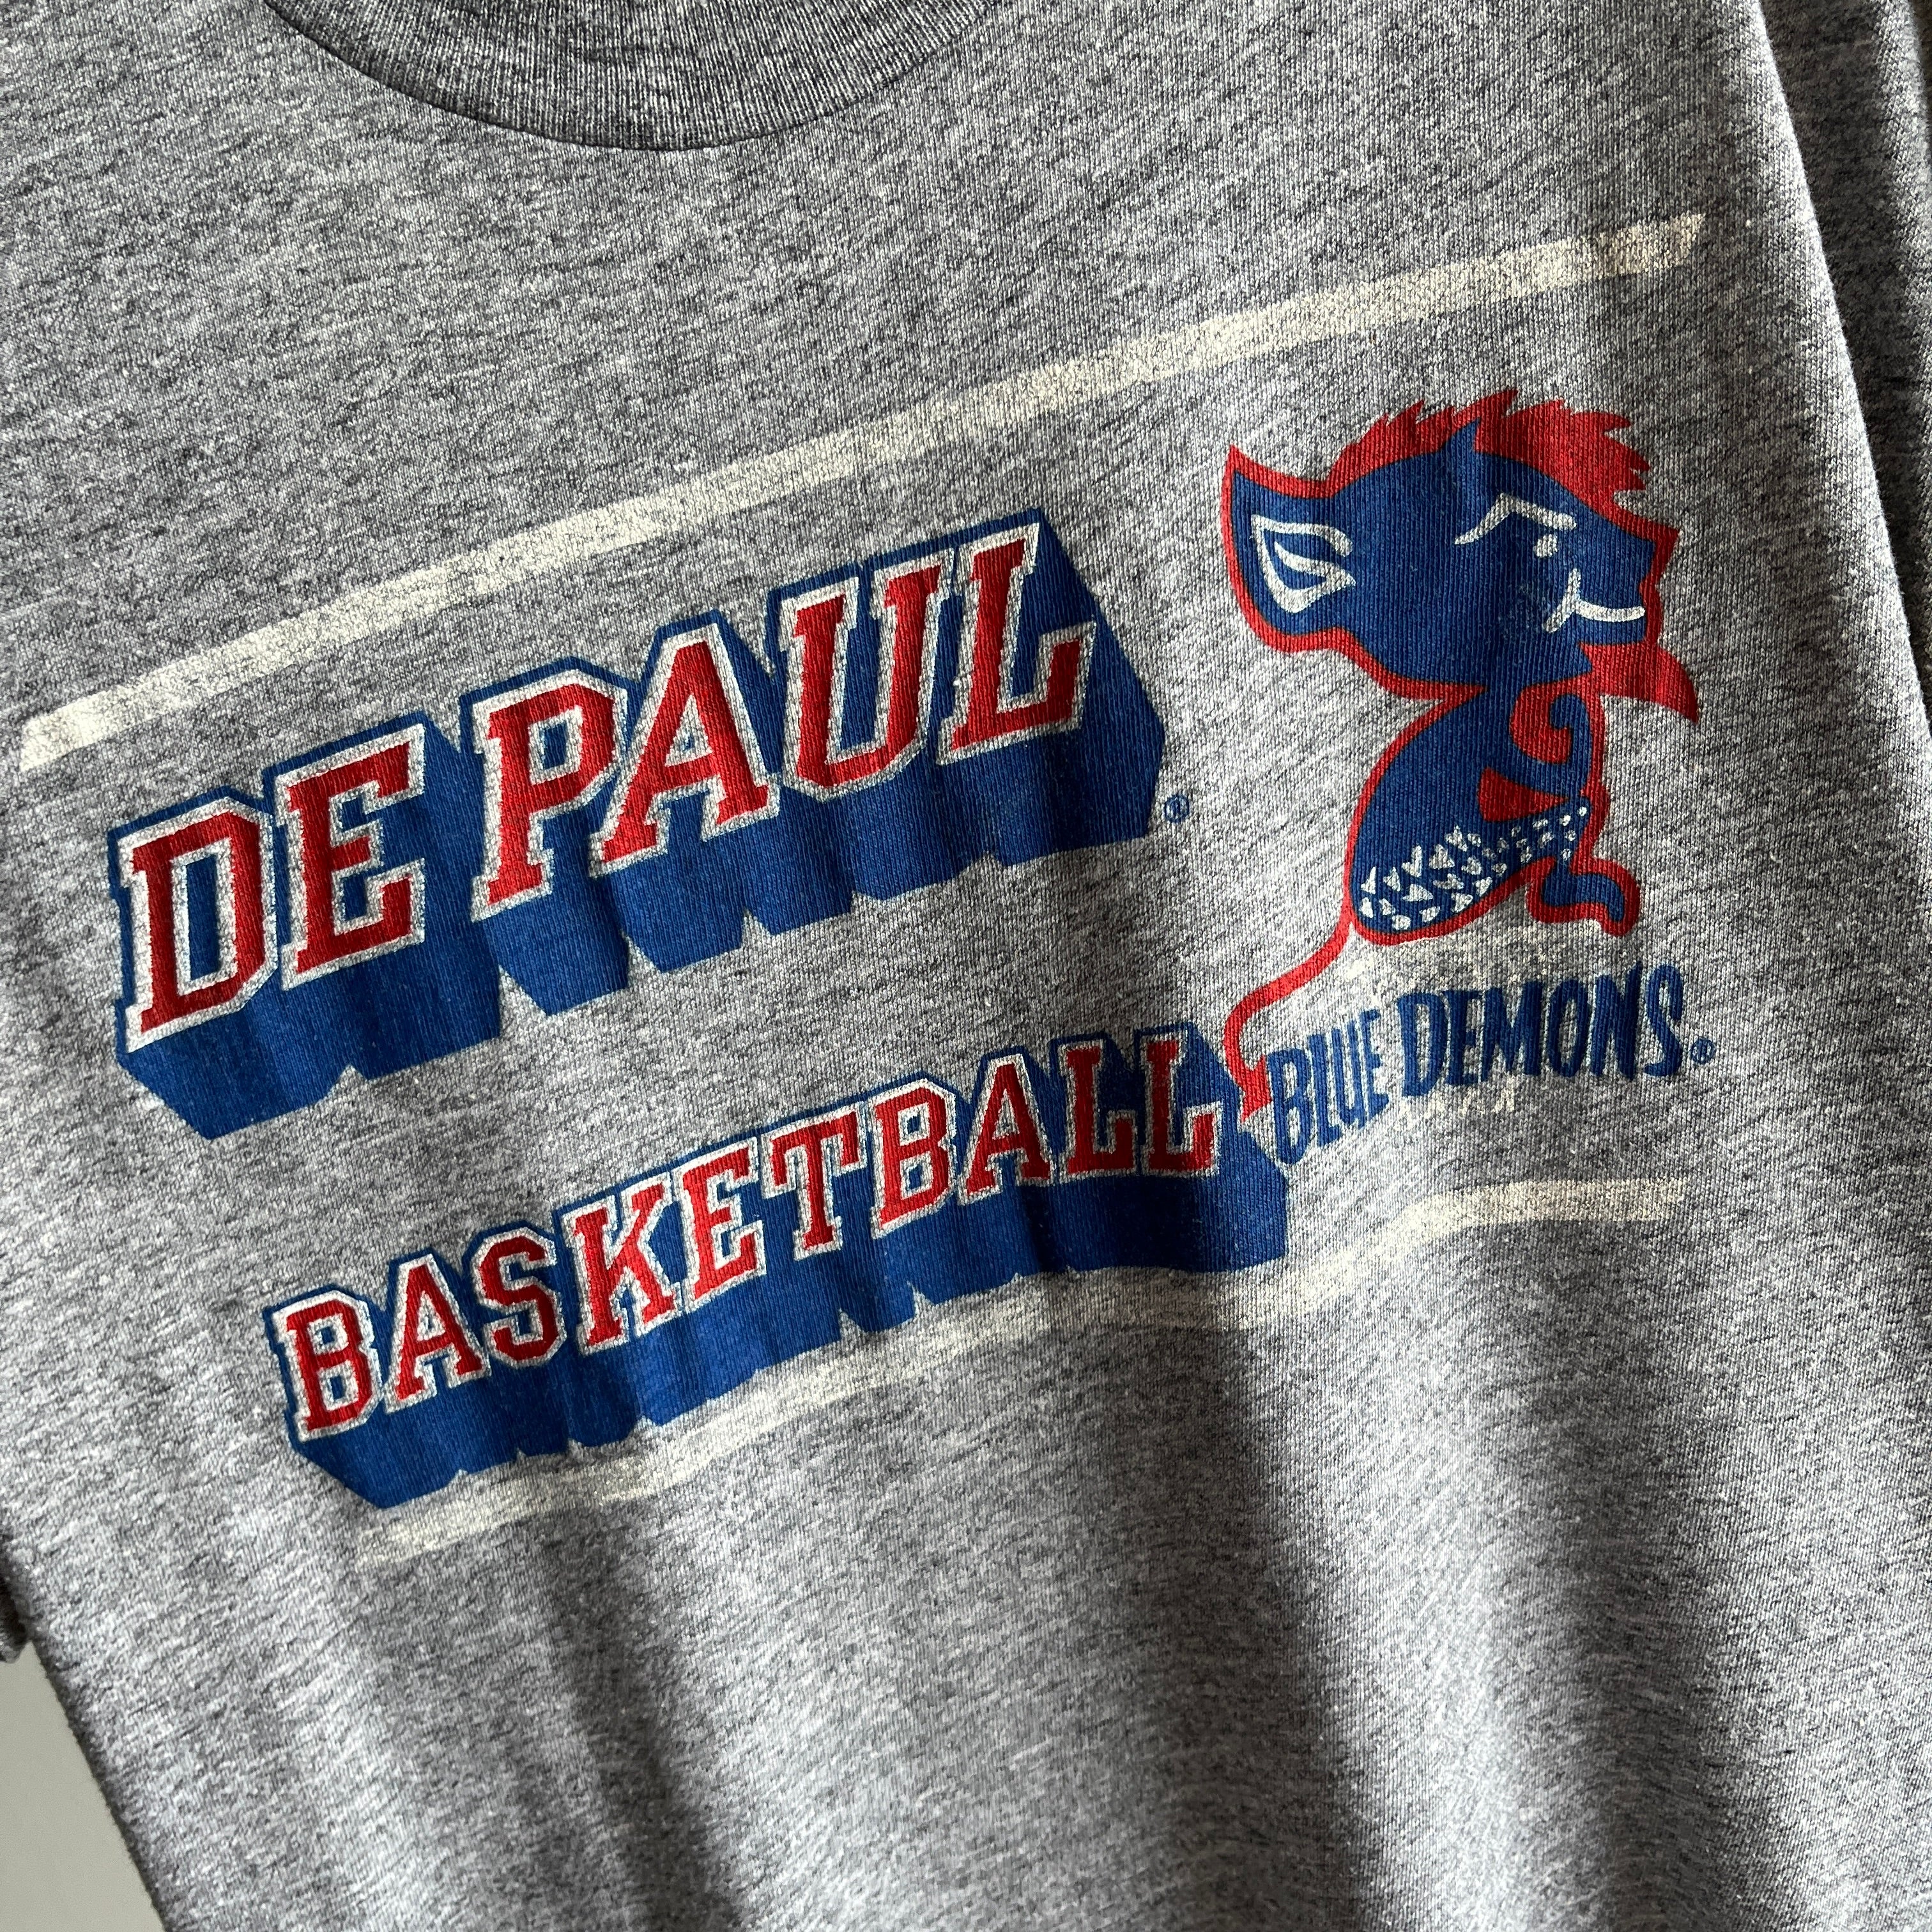 1980s Du Paul T-Shirt with Arm Pit Stains by Velva Sheen!